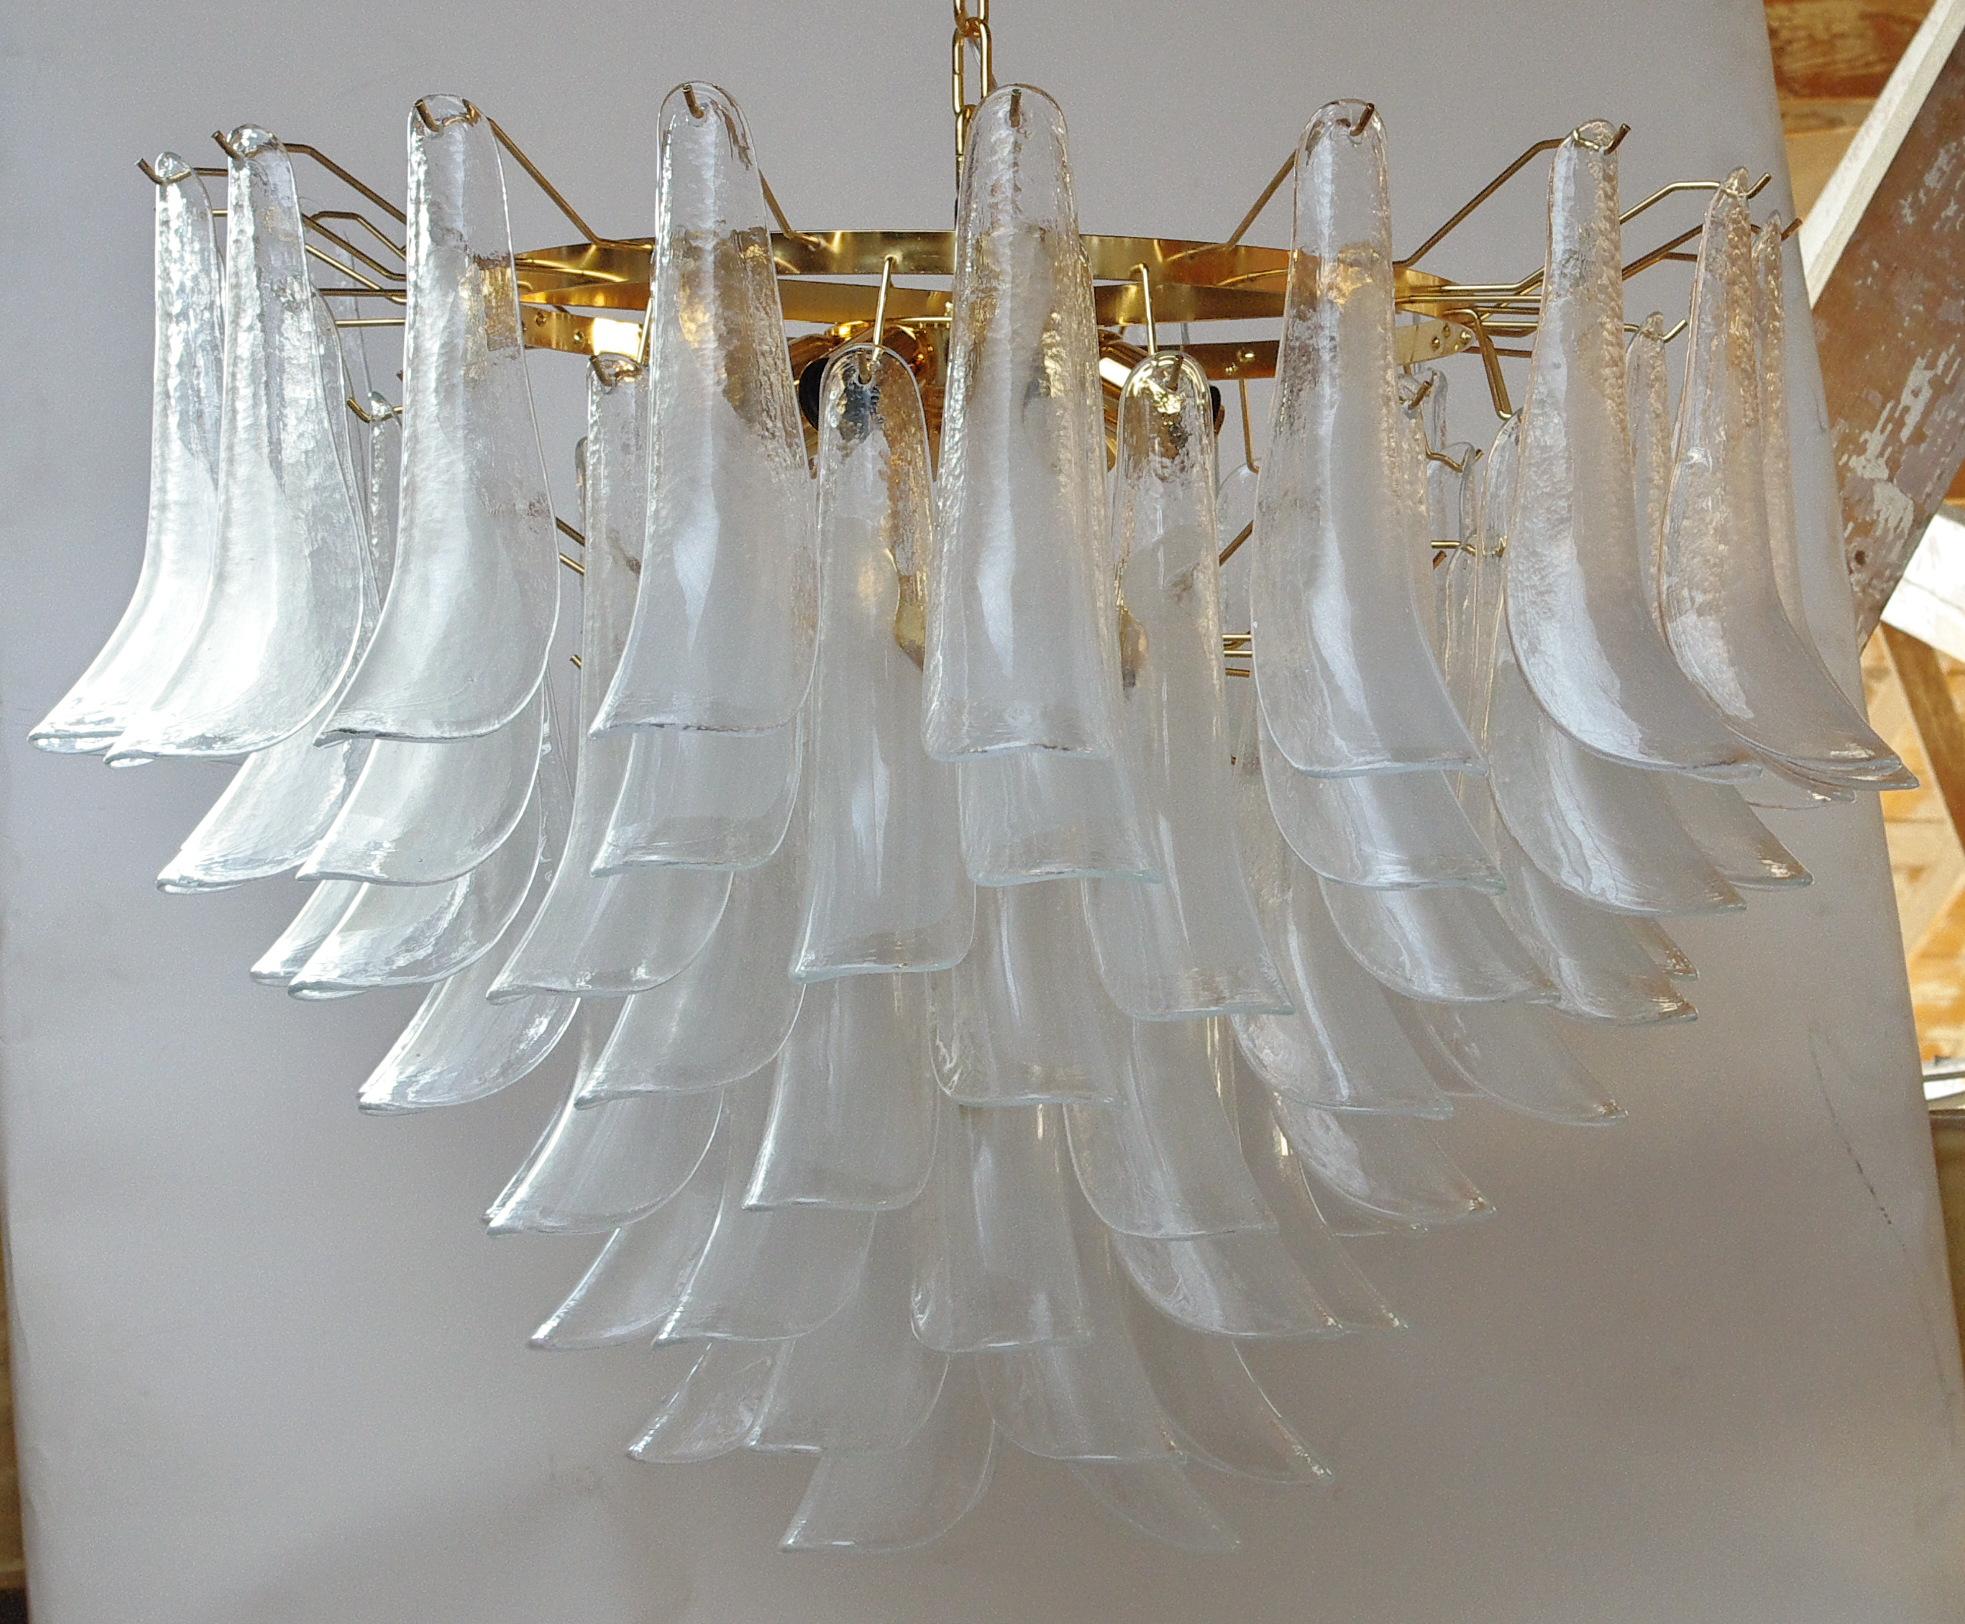 Italian chandelier shown with clear and light milky white murano glass petals mounted on 24 k gold finish frame / Designed by Fabio Bergomi for Fabio Ltd, inspired by Mazzega / Made in Italy
13 lights / E26 or E27 type / max 60W each
Measures: